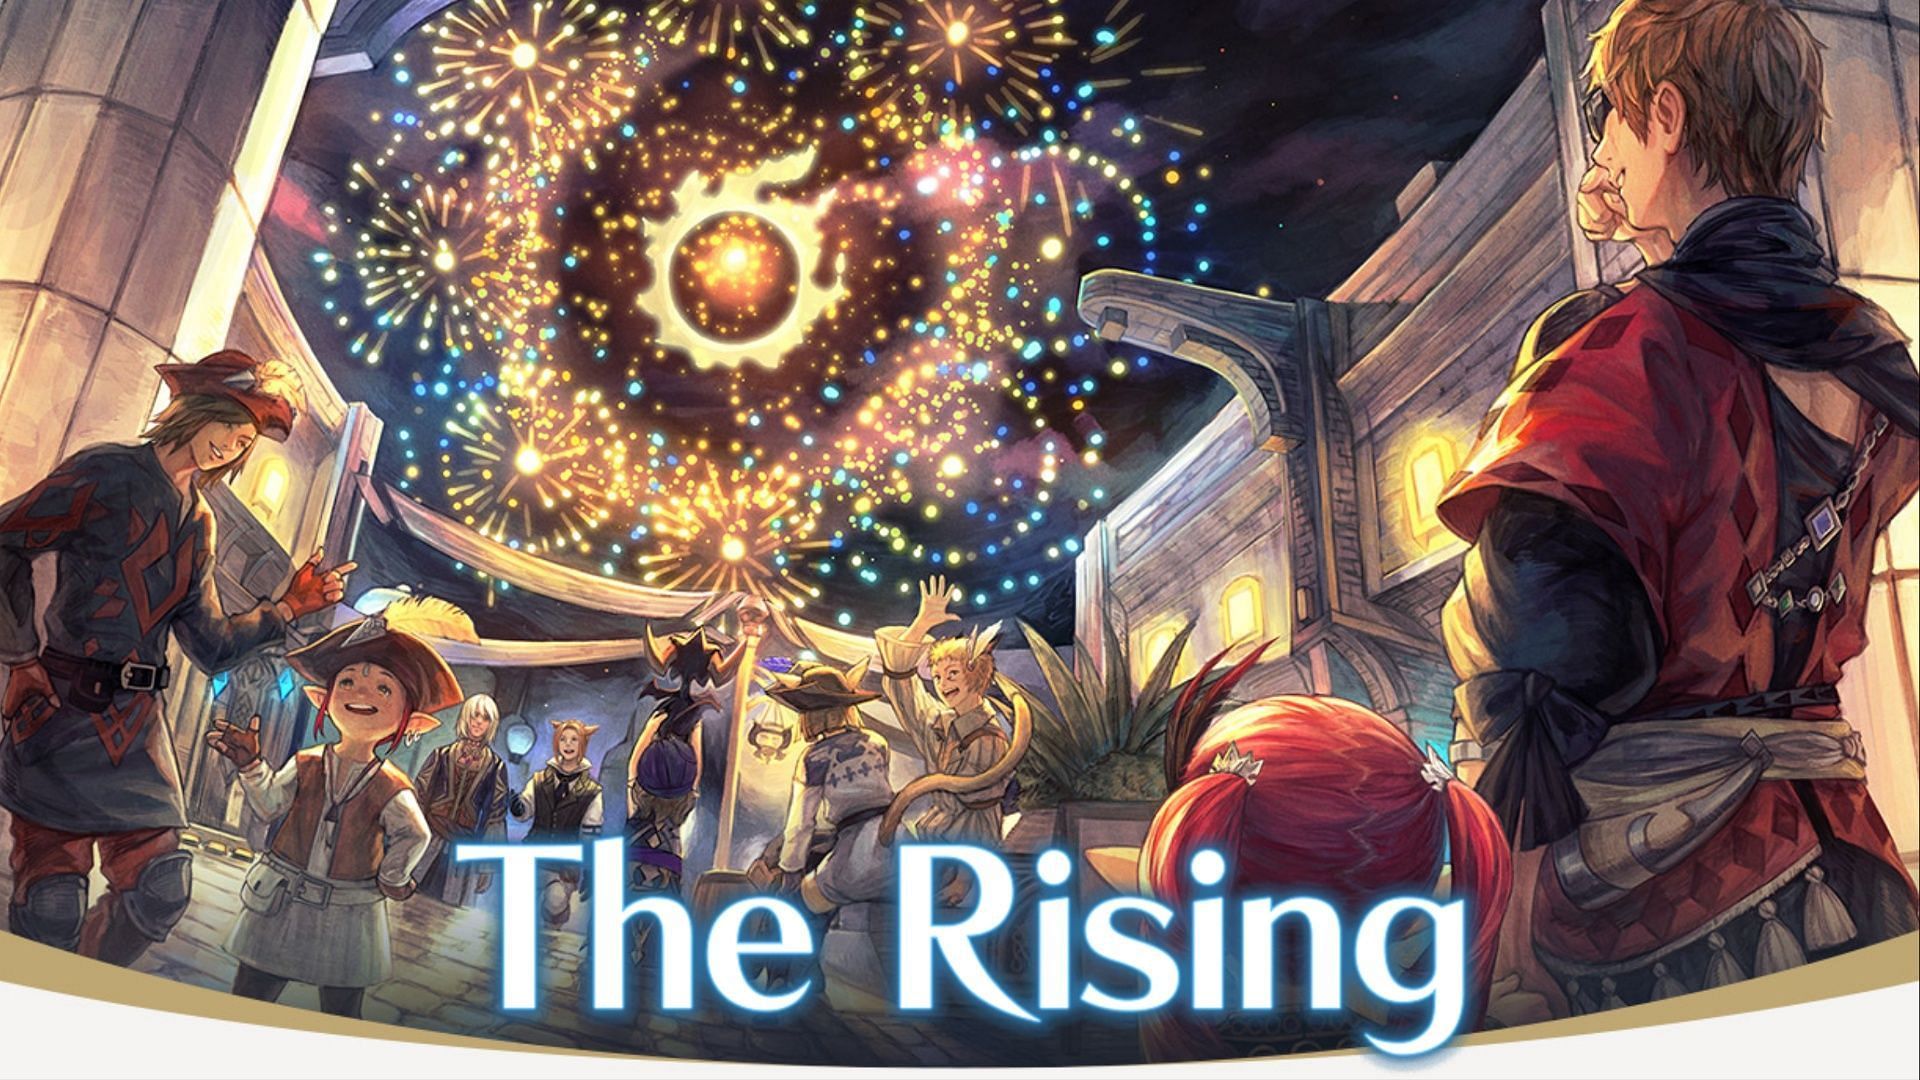 The Rising is Final Fantasy 14